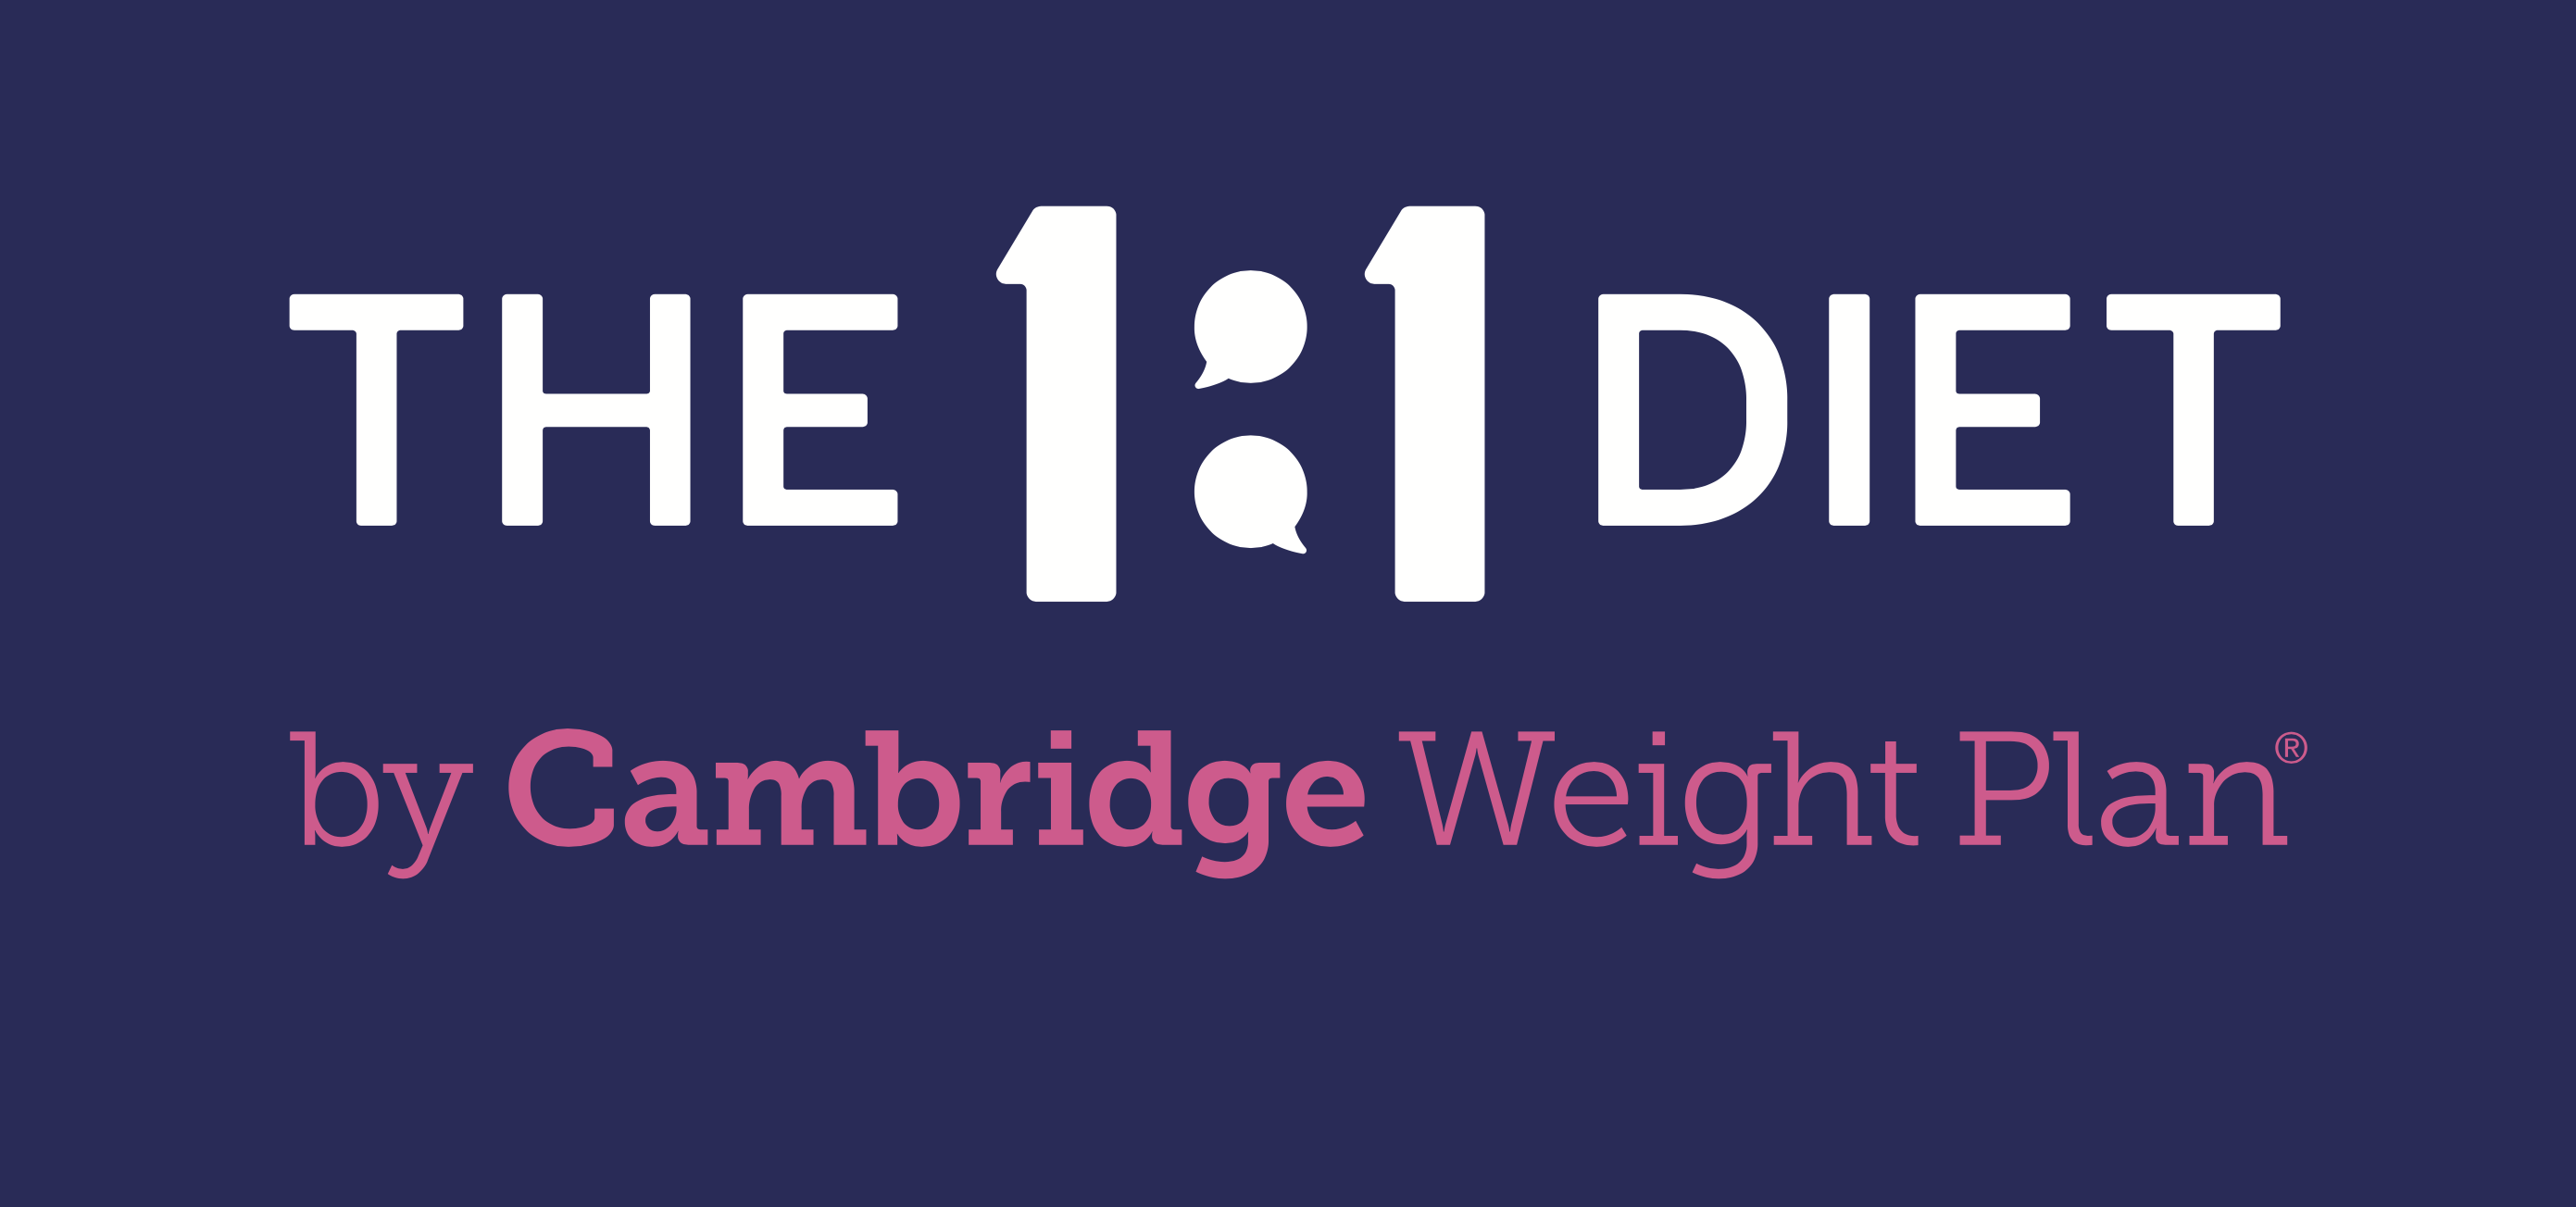 The 1:1 DIET by Cambridge Weight Plan